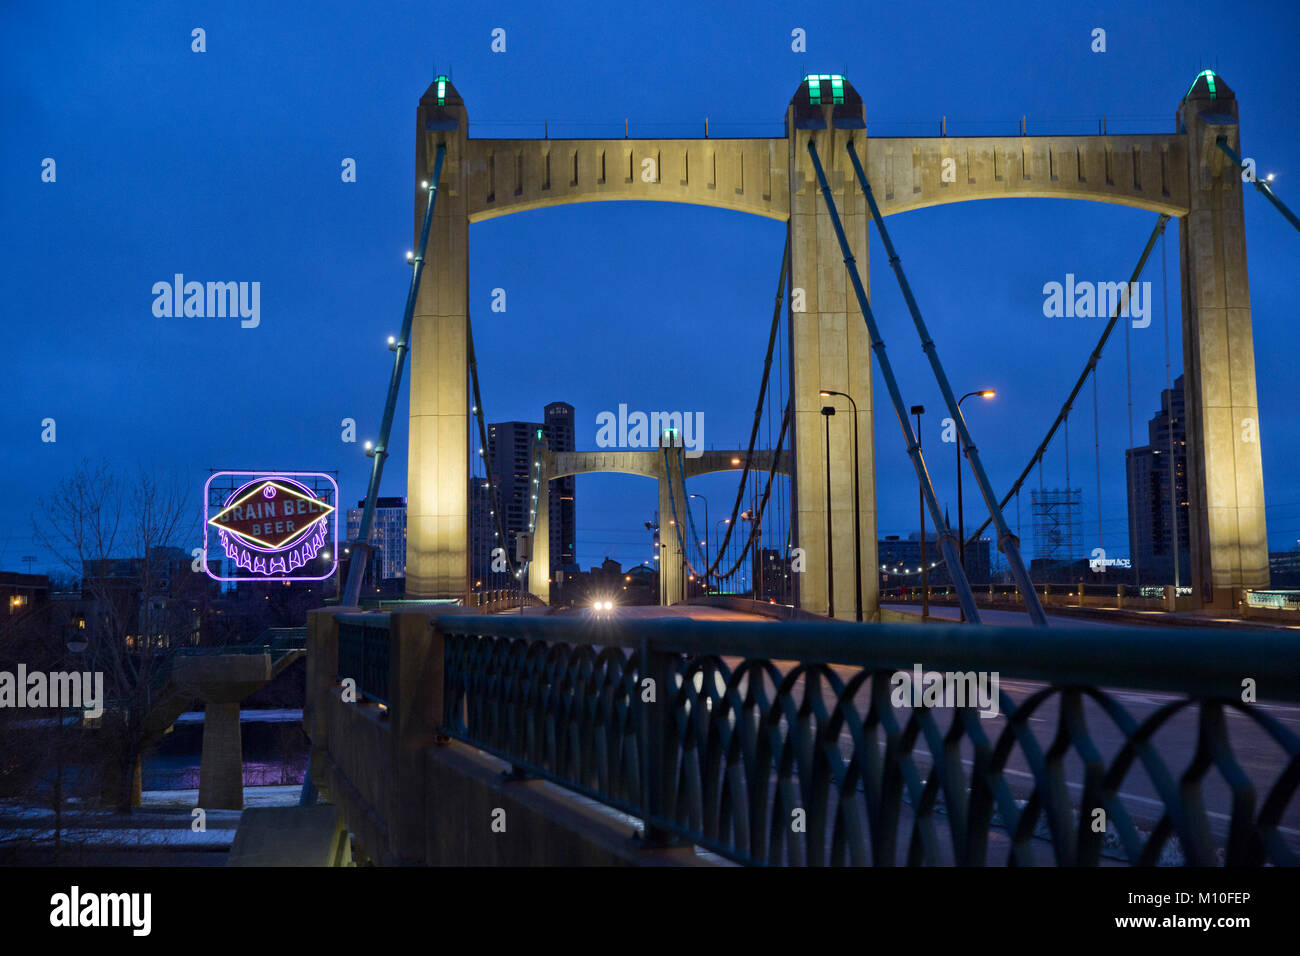 Hennepin Avenue Bridge and the iconic Grain Belt Beer sign in downtown Minneapolis, MN - The bridge is named after 17th century explorer Father Louis  Stock Photo